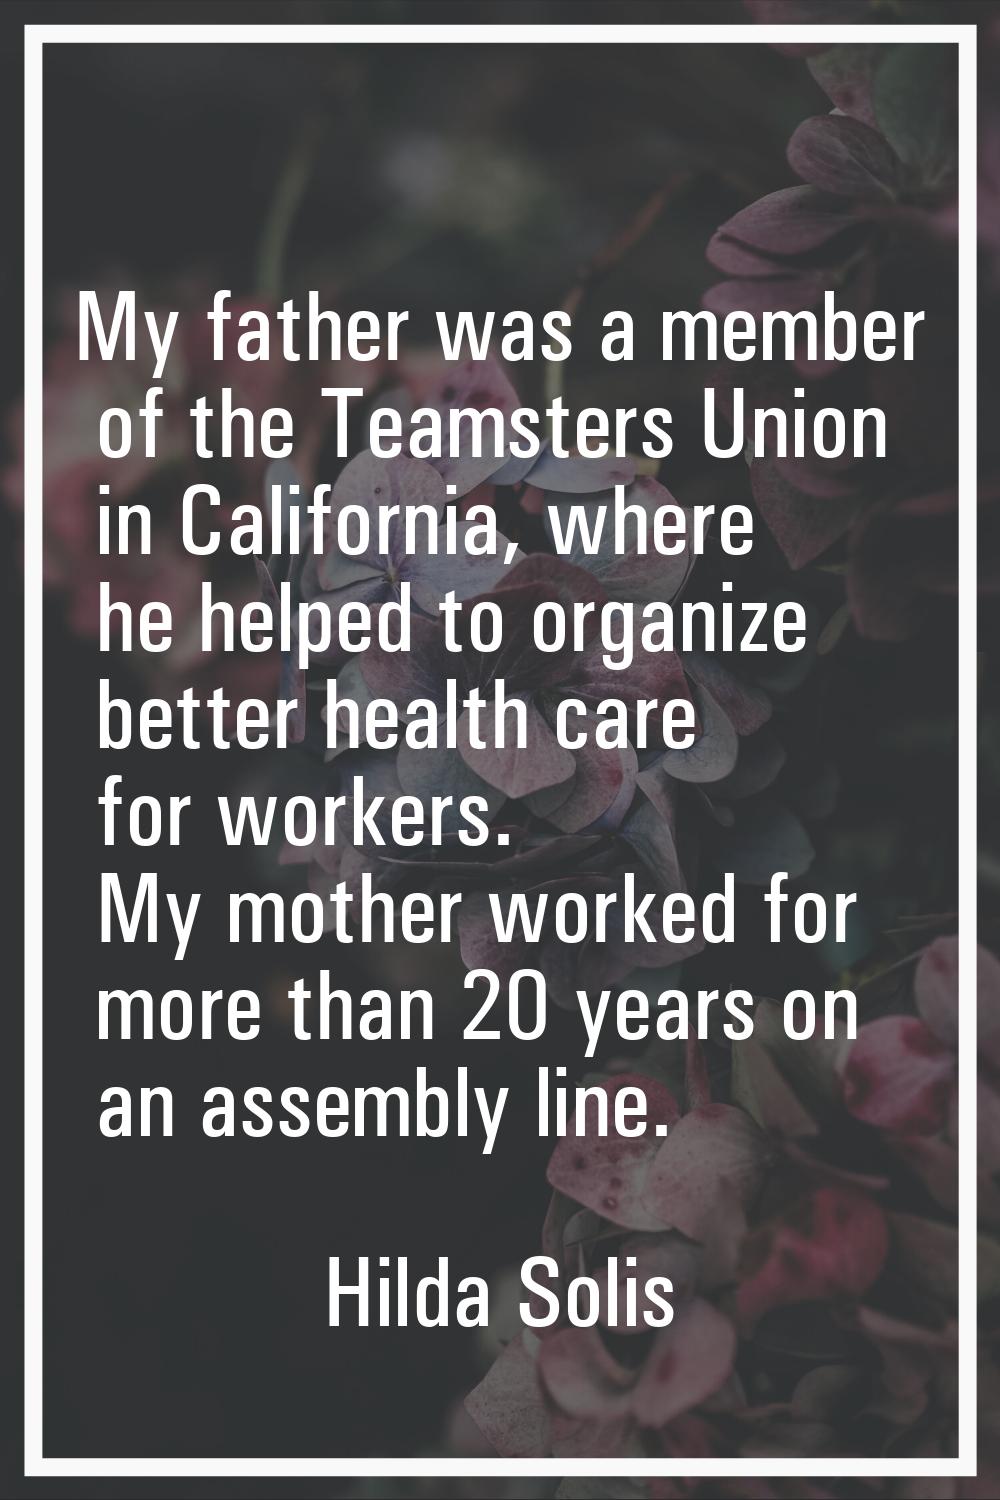 My father was a member of the Teamsters Union in California, where he helped to organize better hea